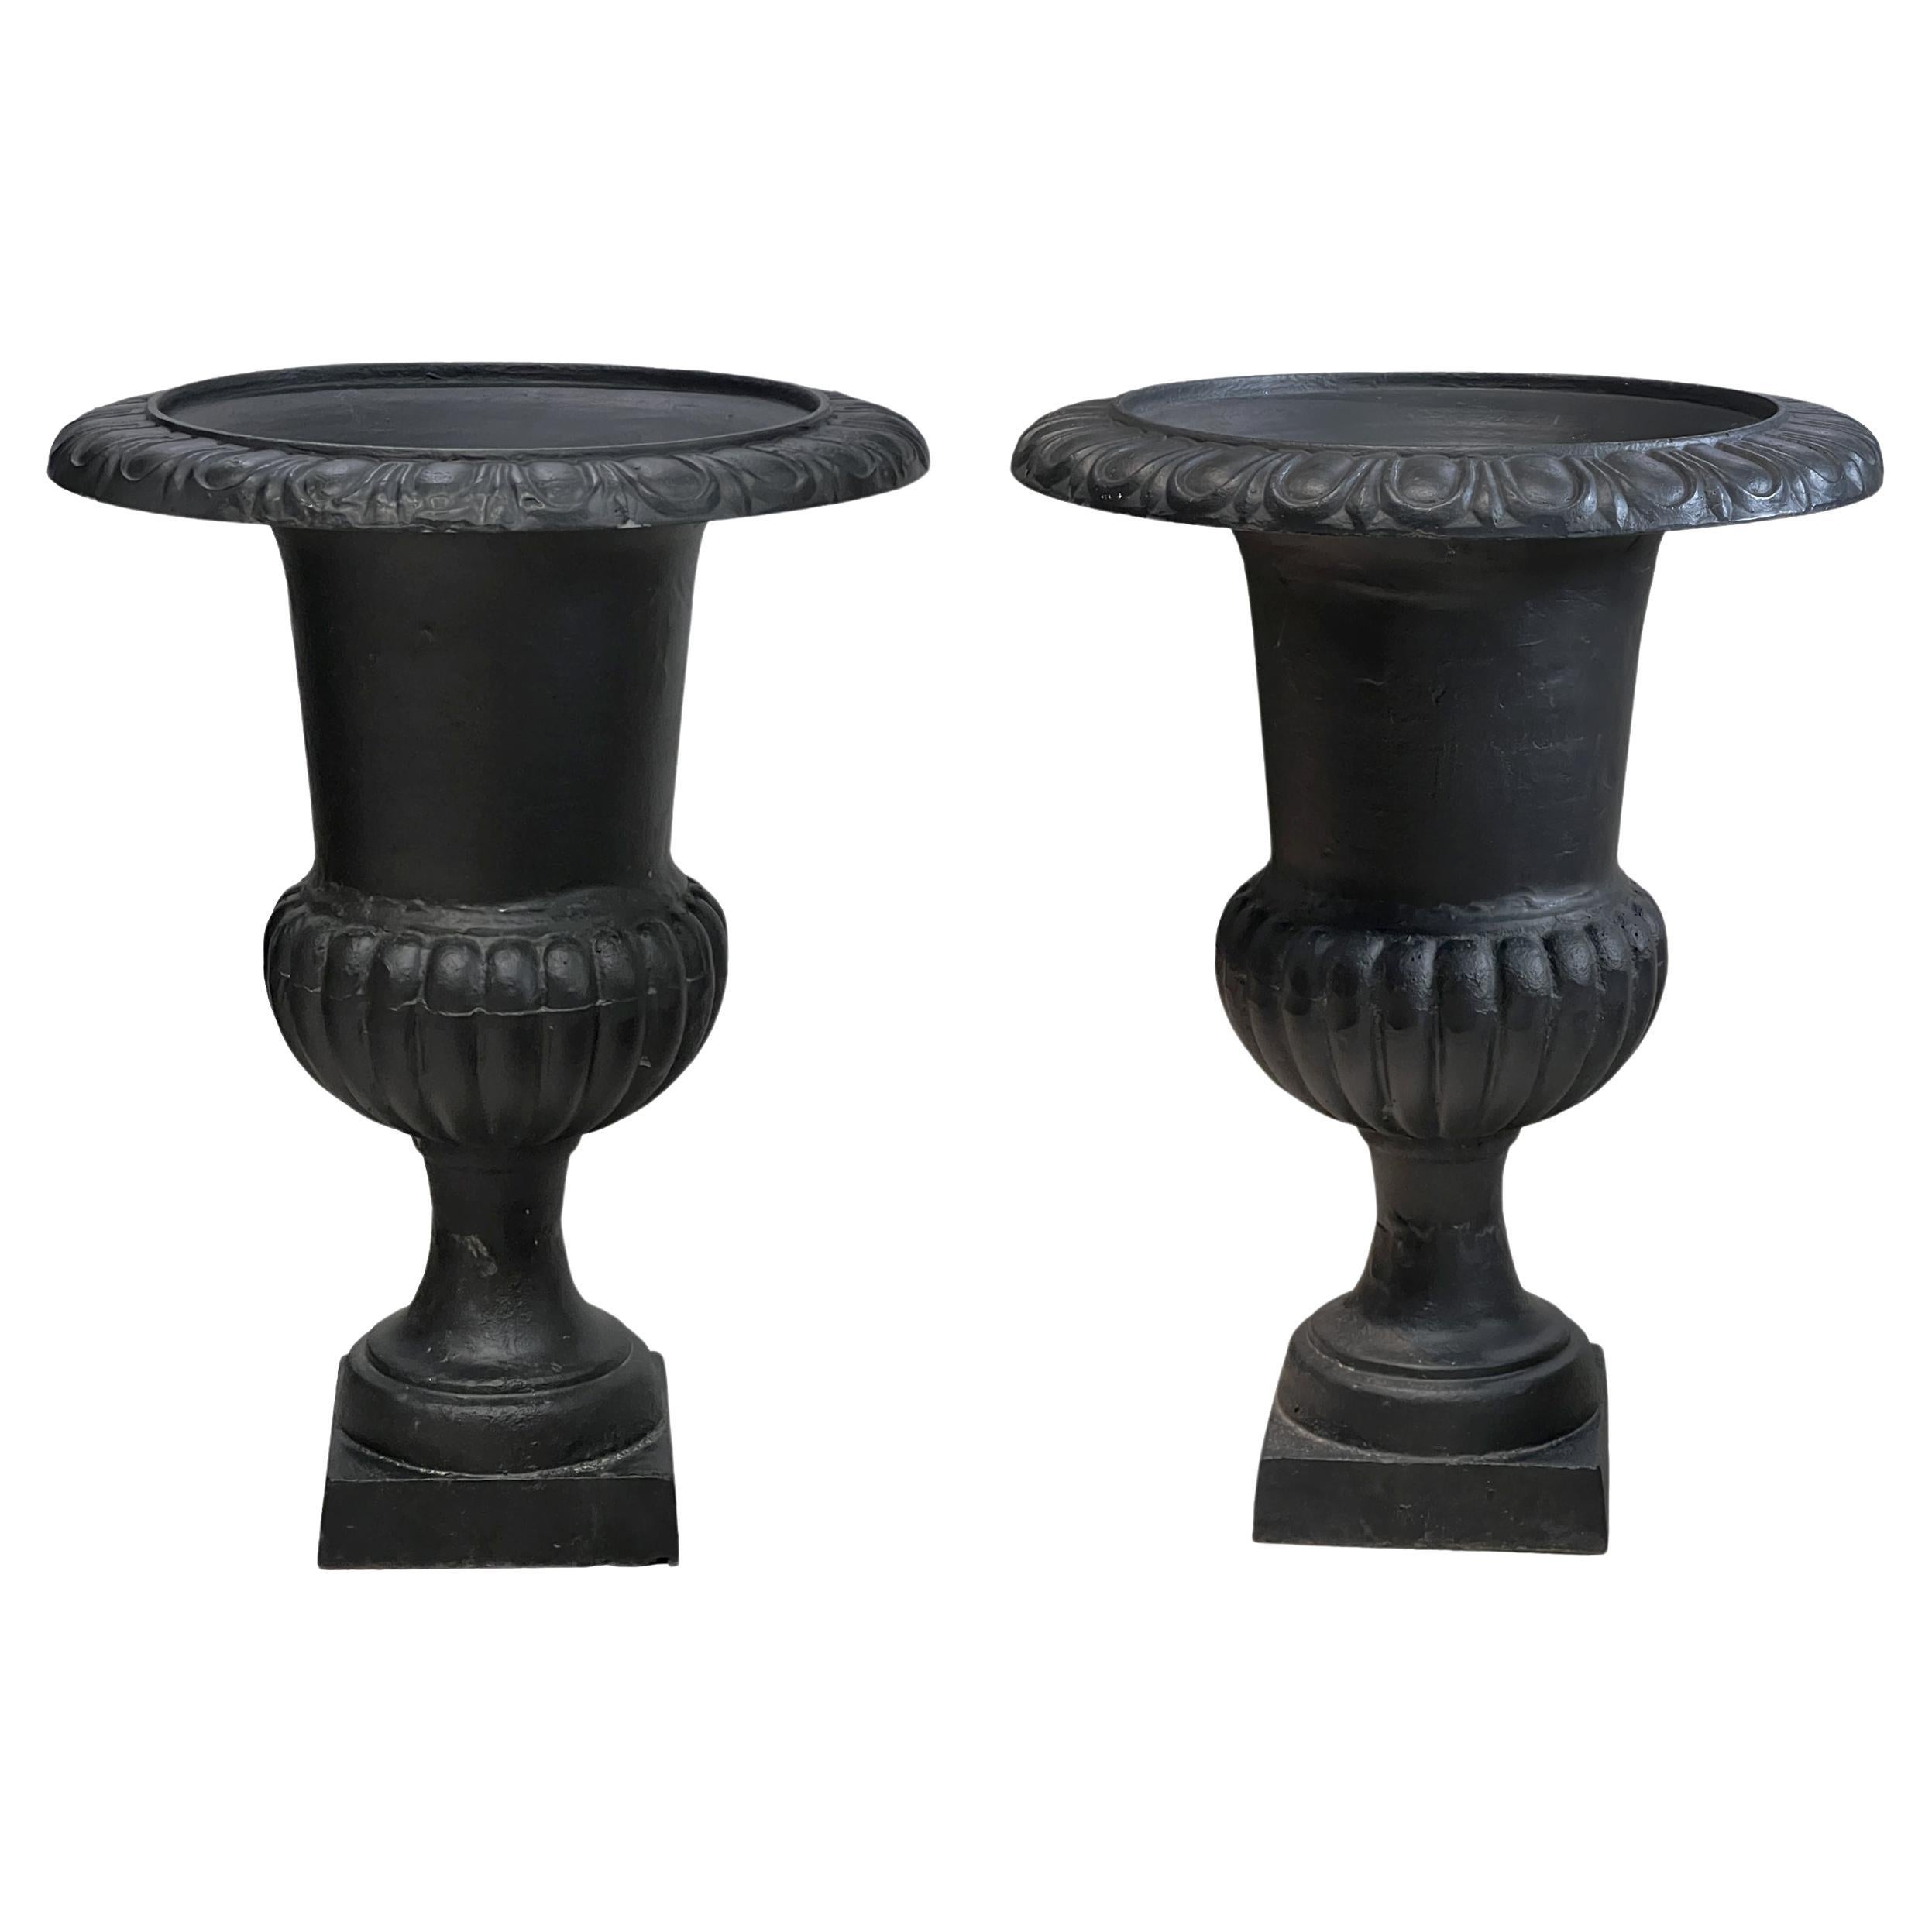 French Neoclassical-Style Large Cast Iron Garden Urns or Planters, Set of 2